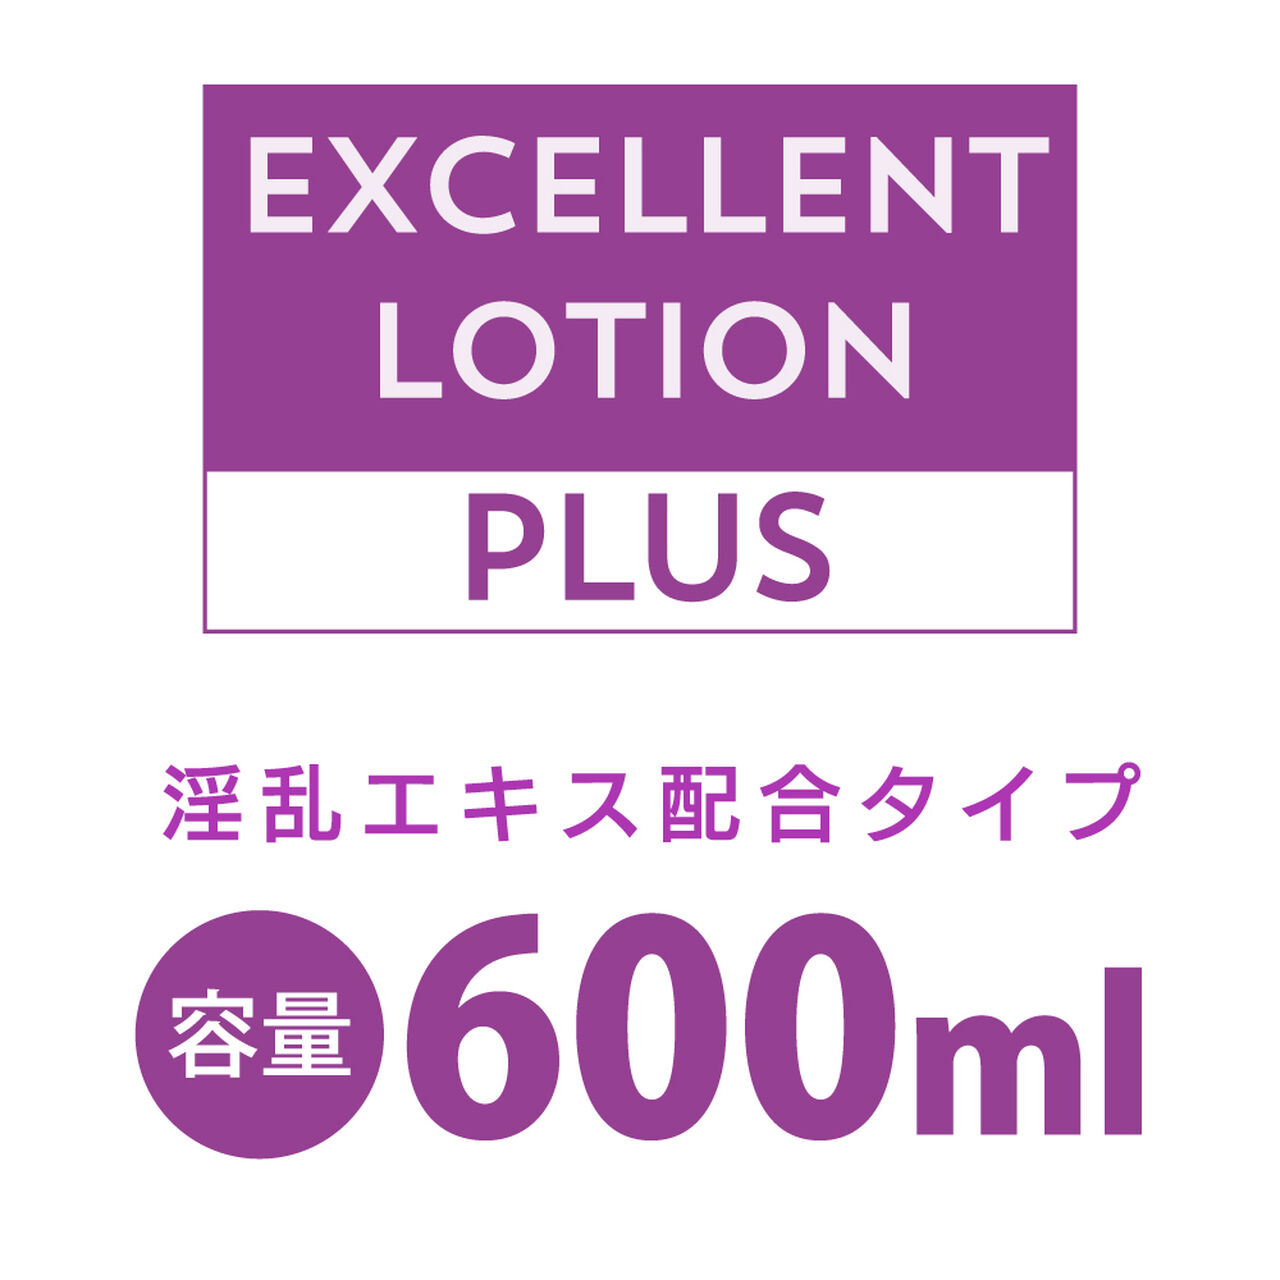 EXCELLENT LOTION PLUS WITH INRAN EXTRACT HAIDOU TYPE 600ml,, large image number 6